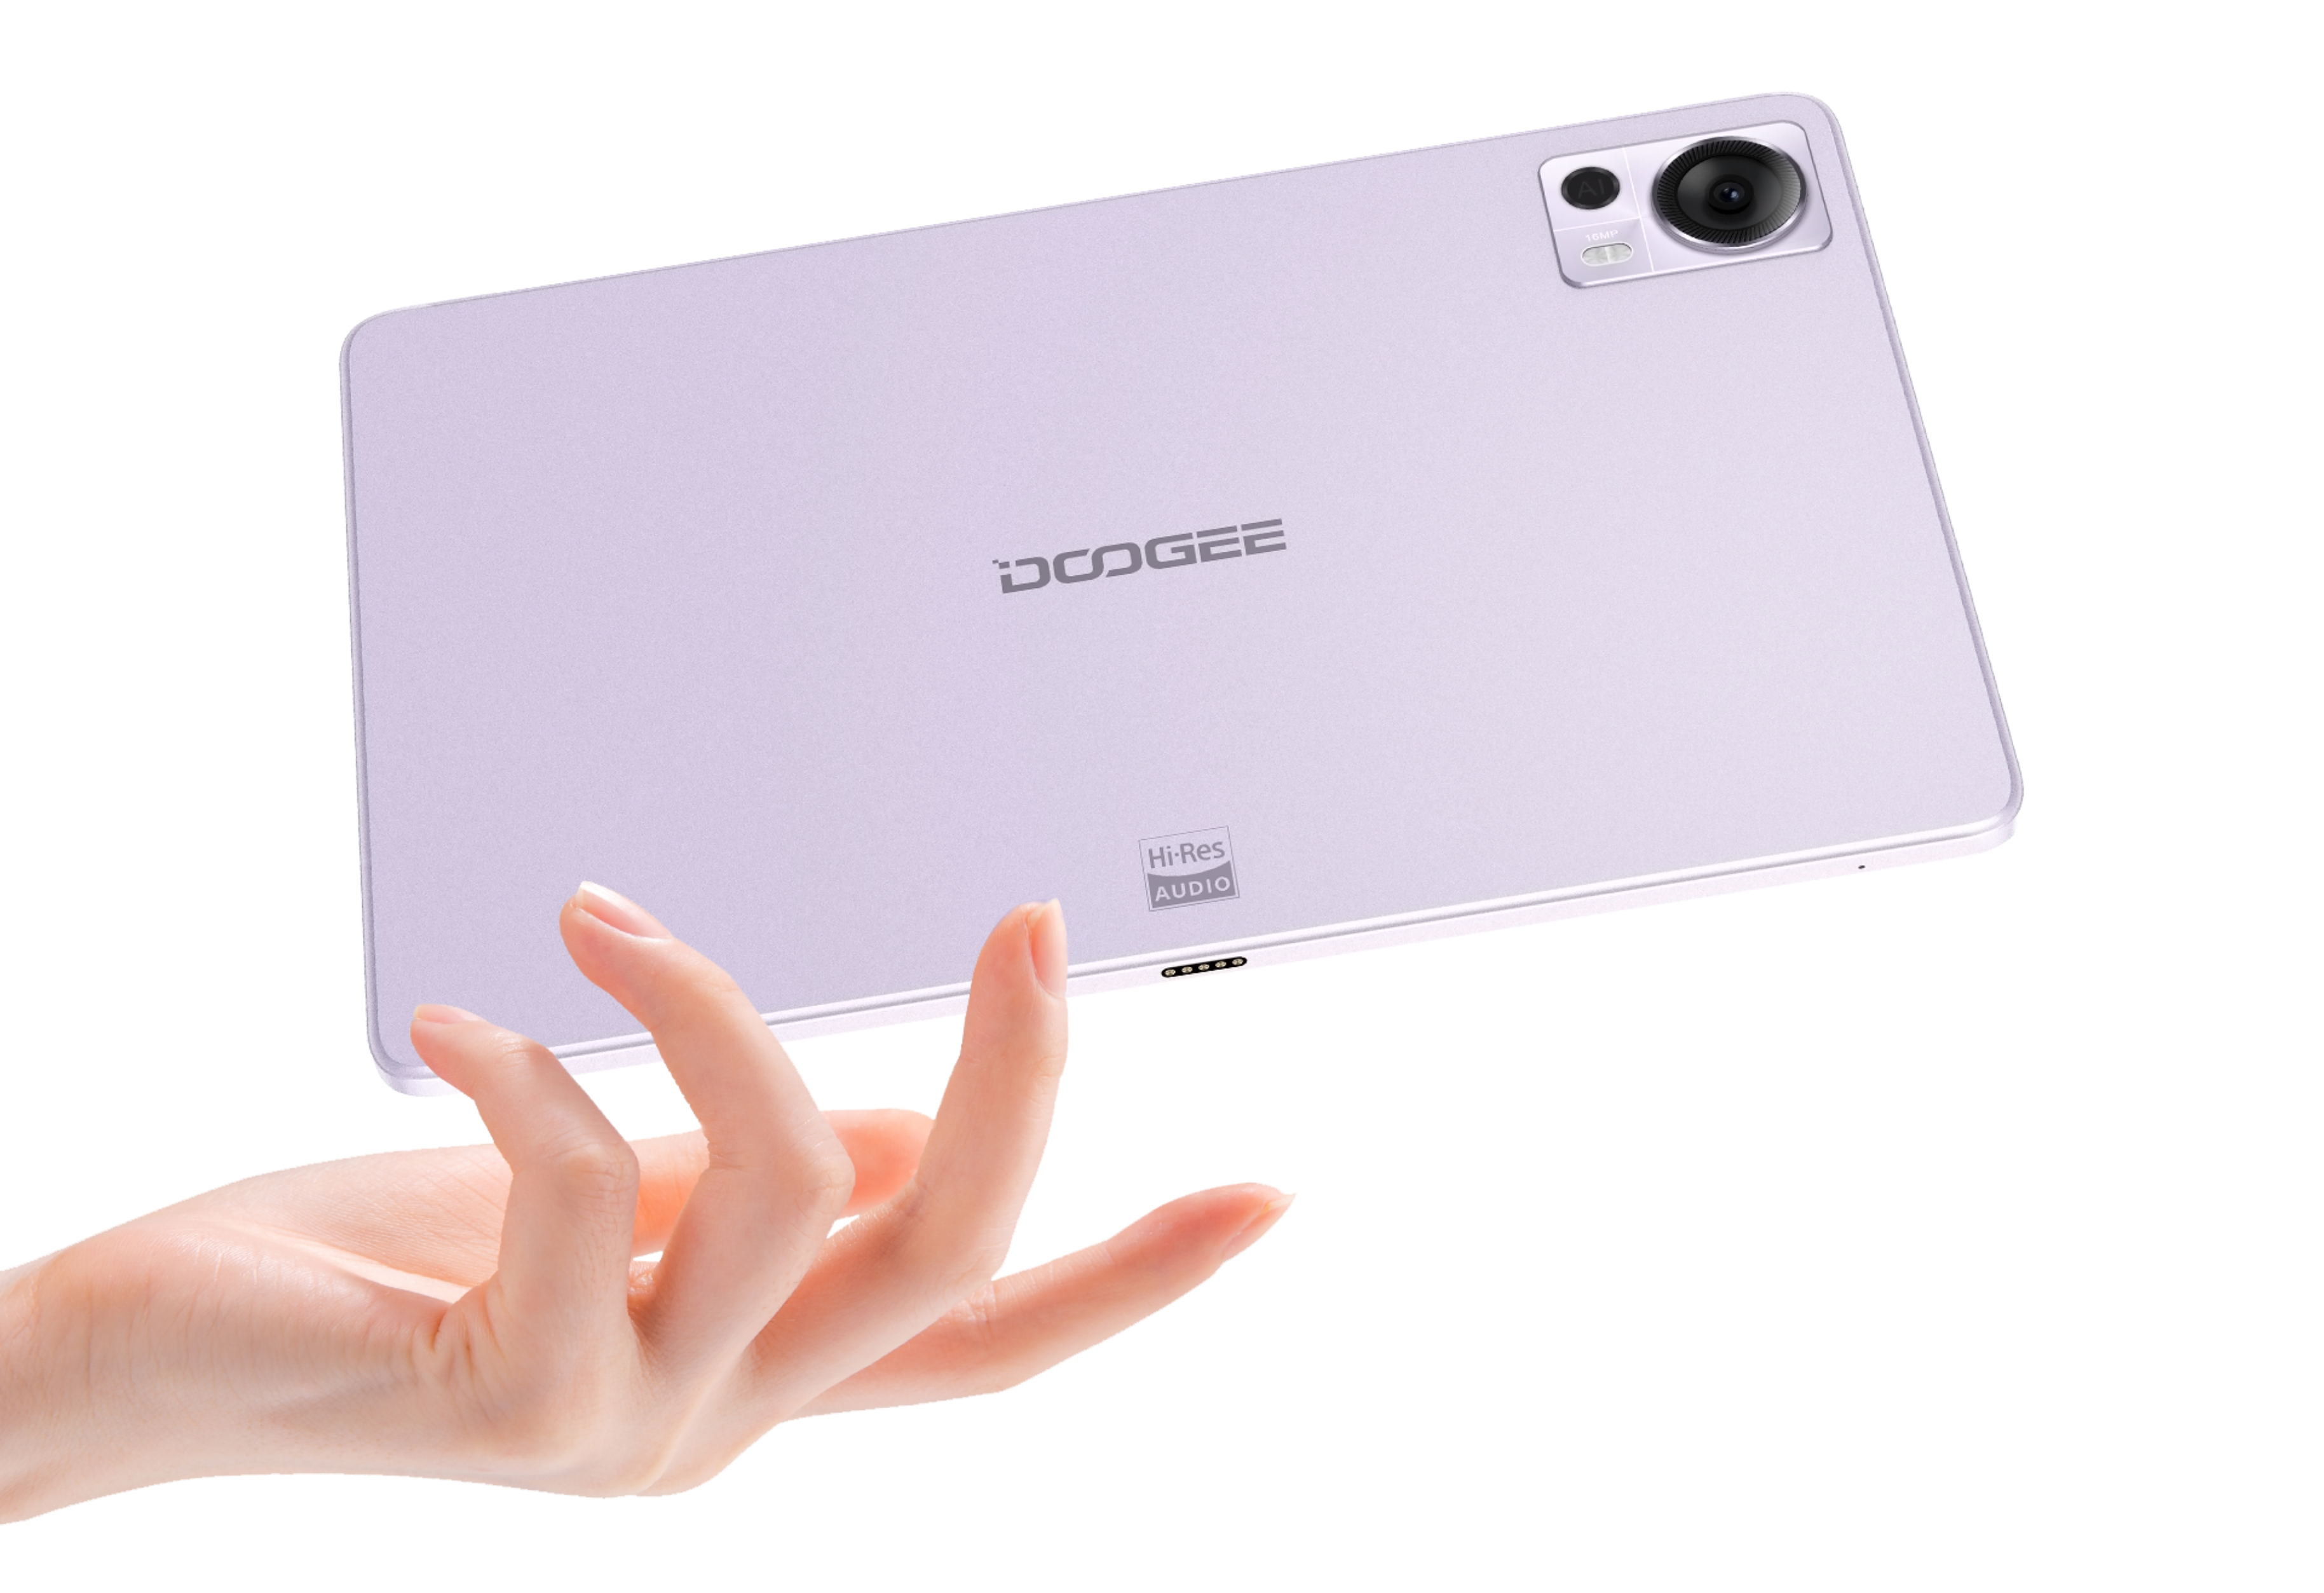 Unisoc T616-powered Doogee T20 tablet coming later this month -   News